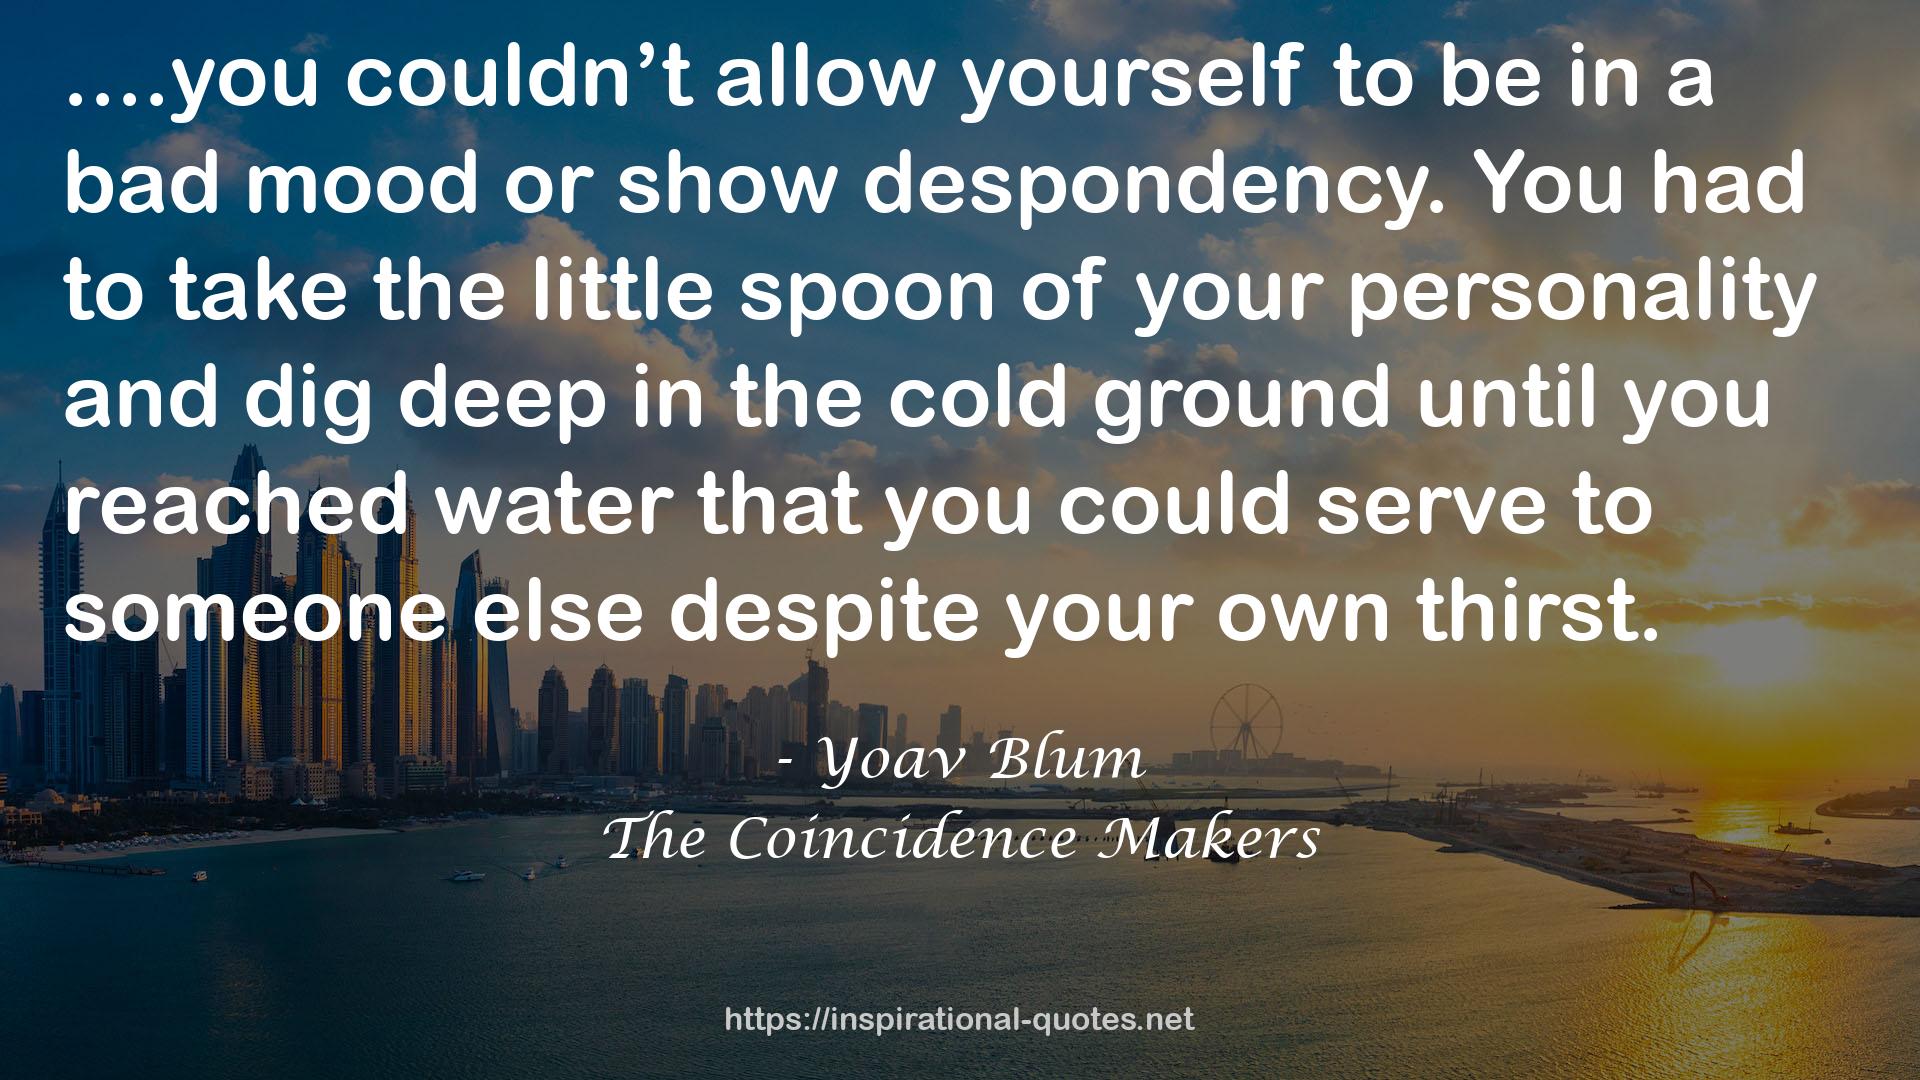 The Coincidence Makers QUOTES